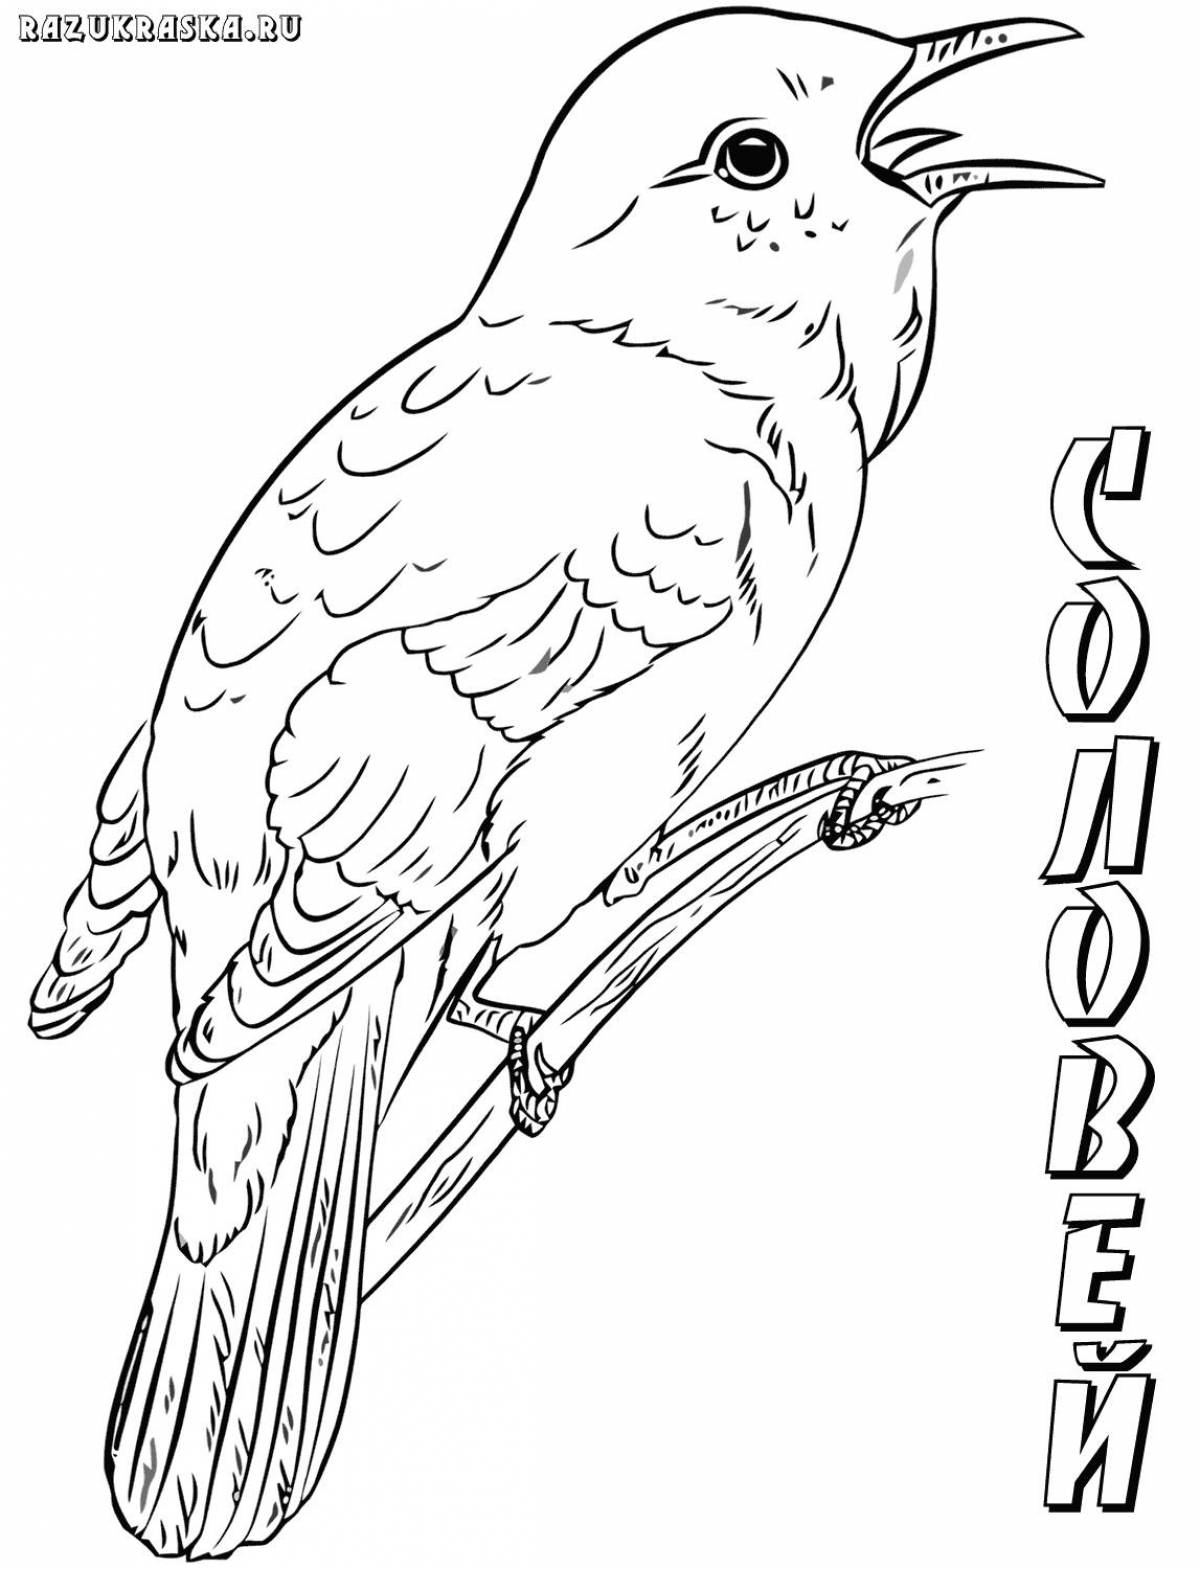 Adorable wintering birds coloring book for children 5-6 years old